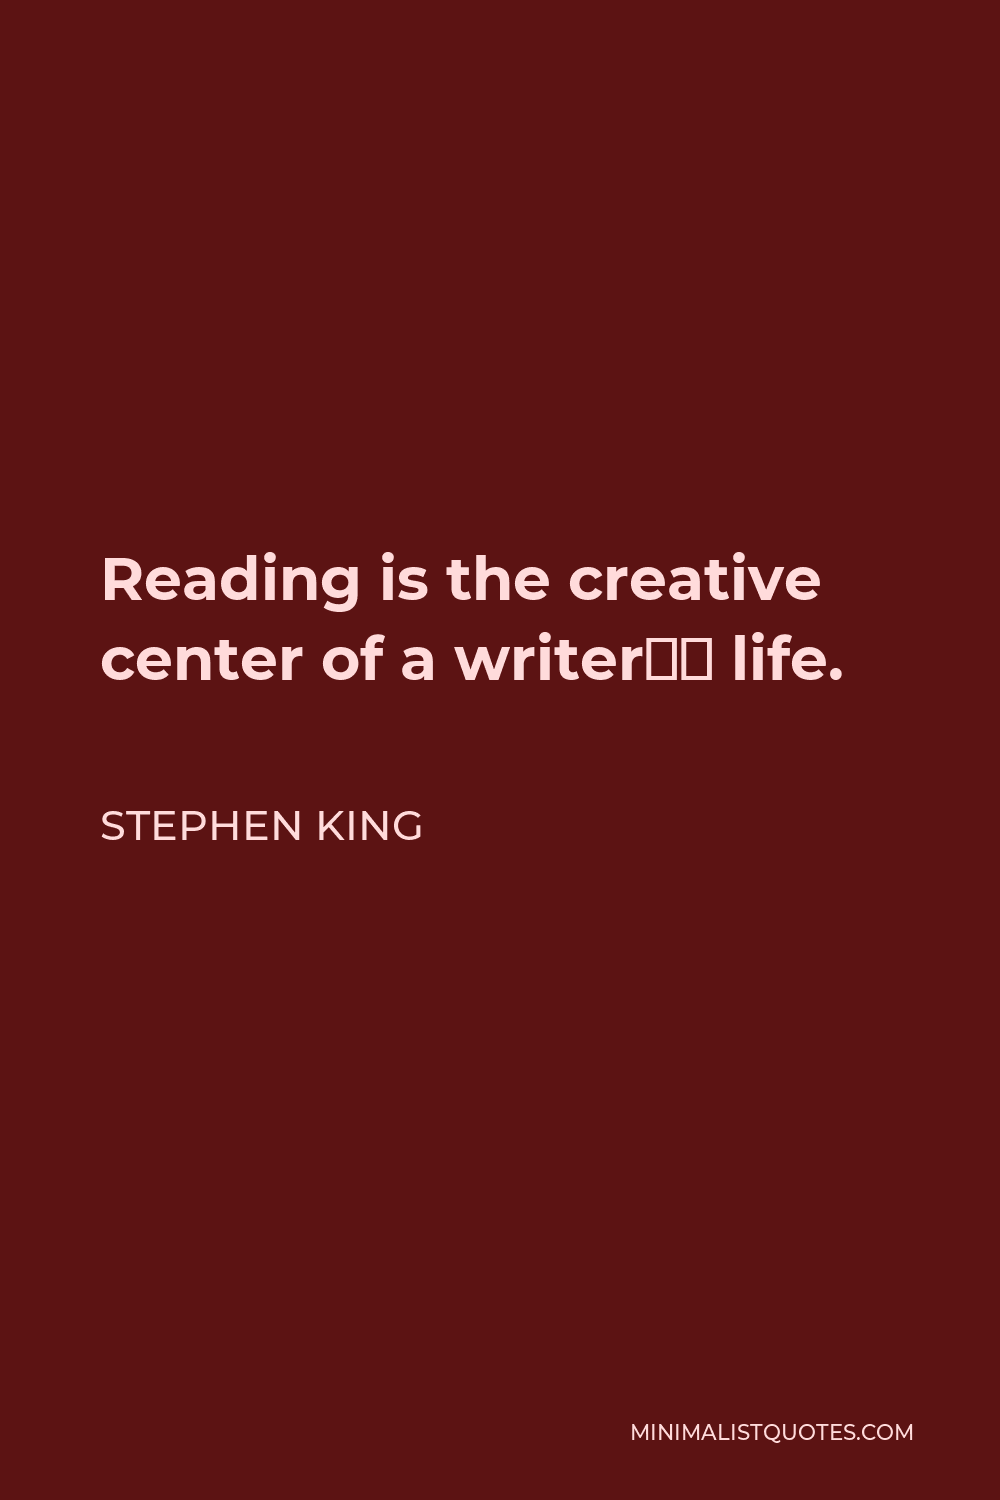 Stephen King Quote - Reading is the creative center of a writer’s life.